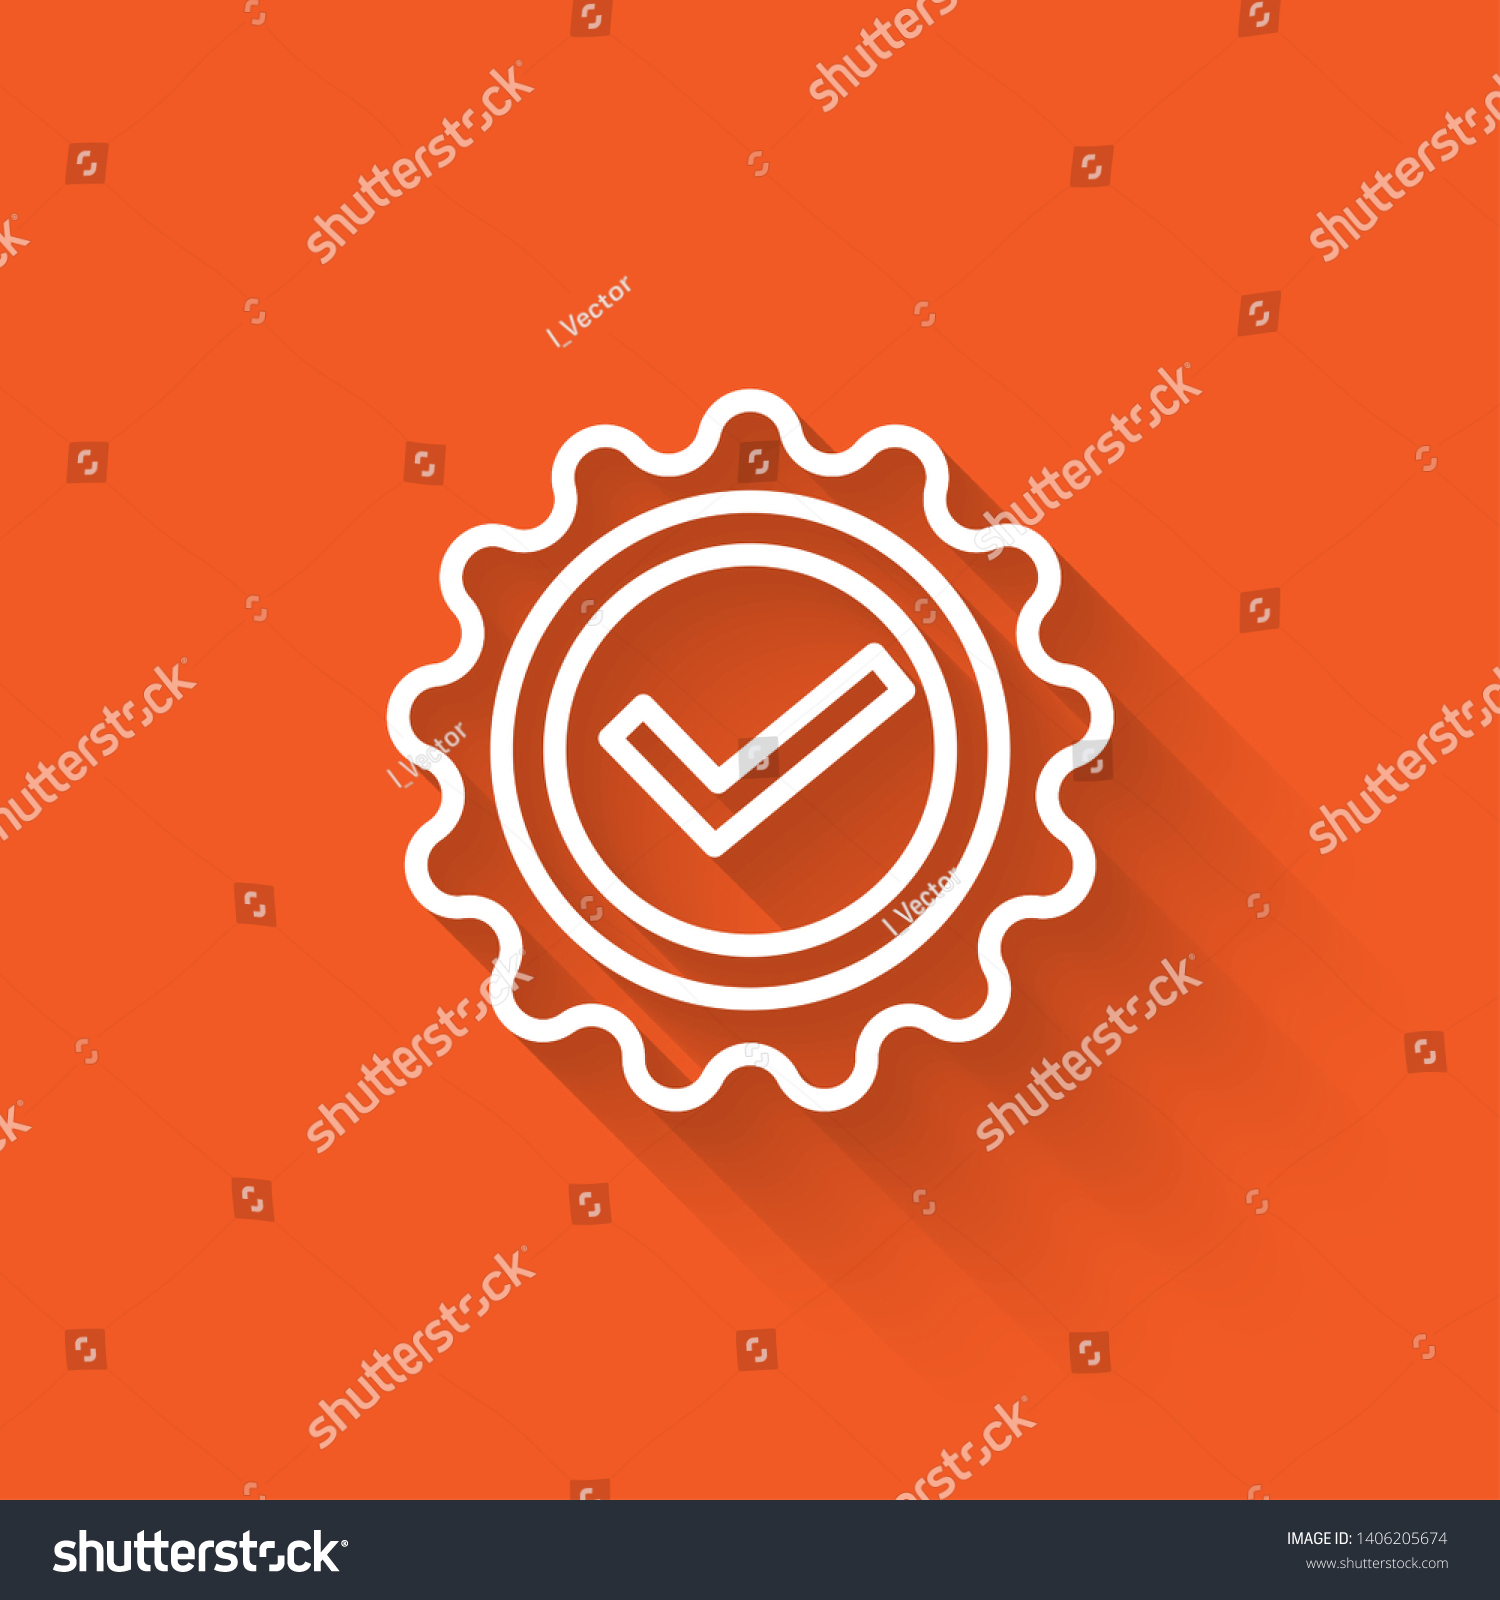 SVG of Liner illustration with long shadow on orange background  Completed Vector Stamp. Grunge rubber stamp or badge, label with text 